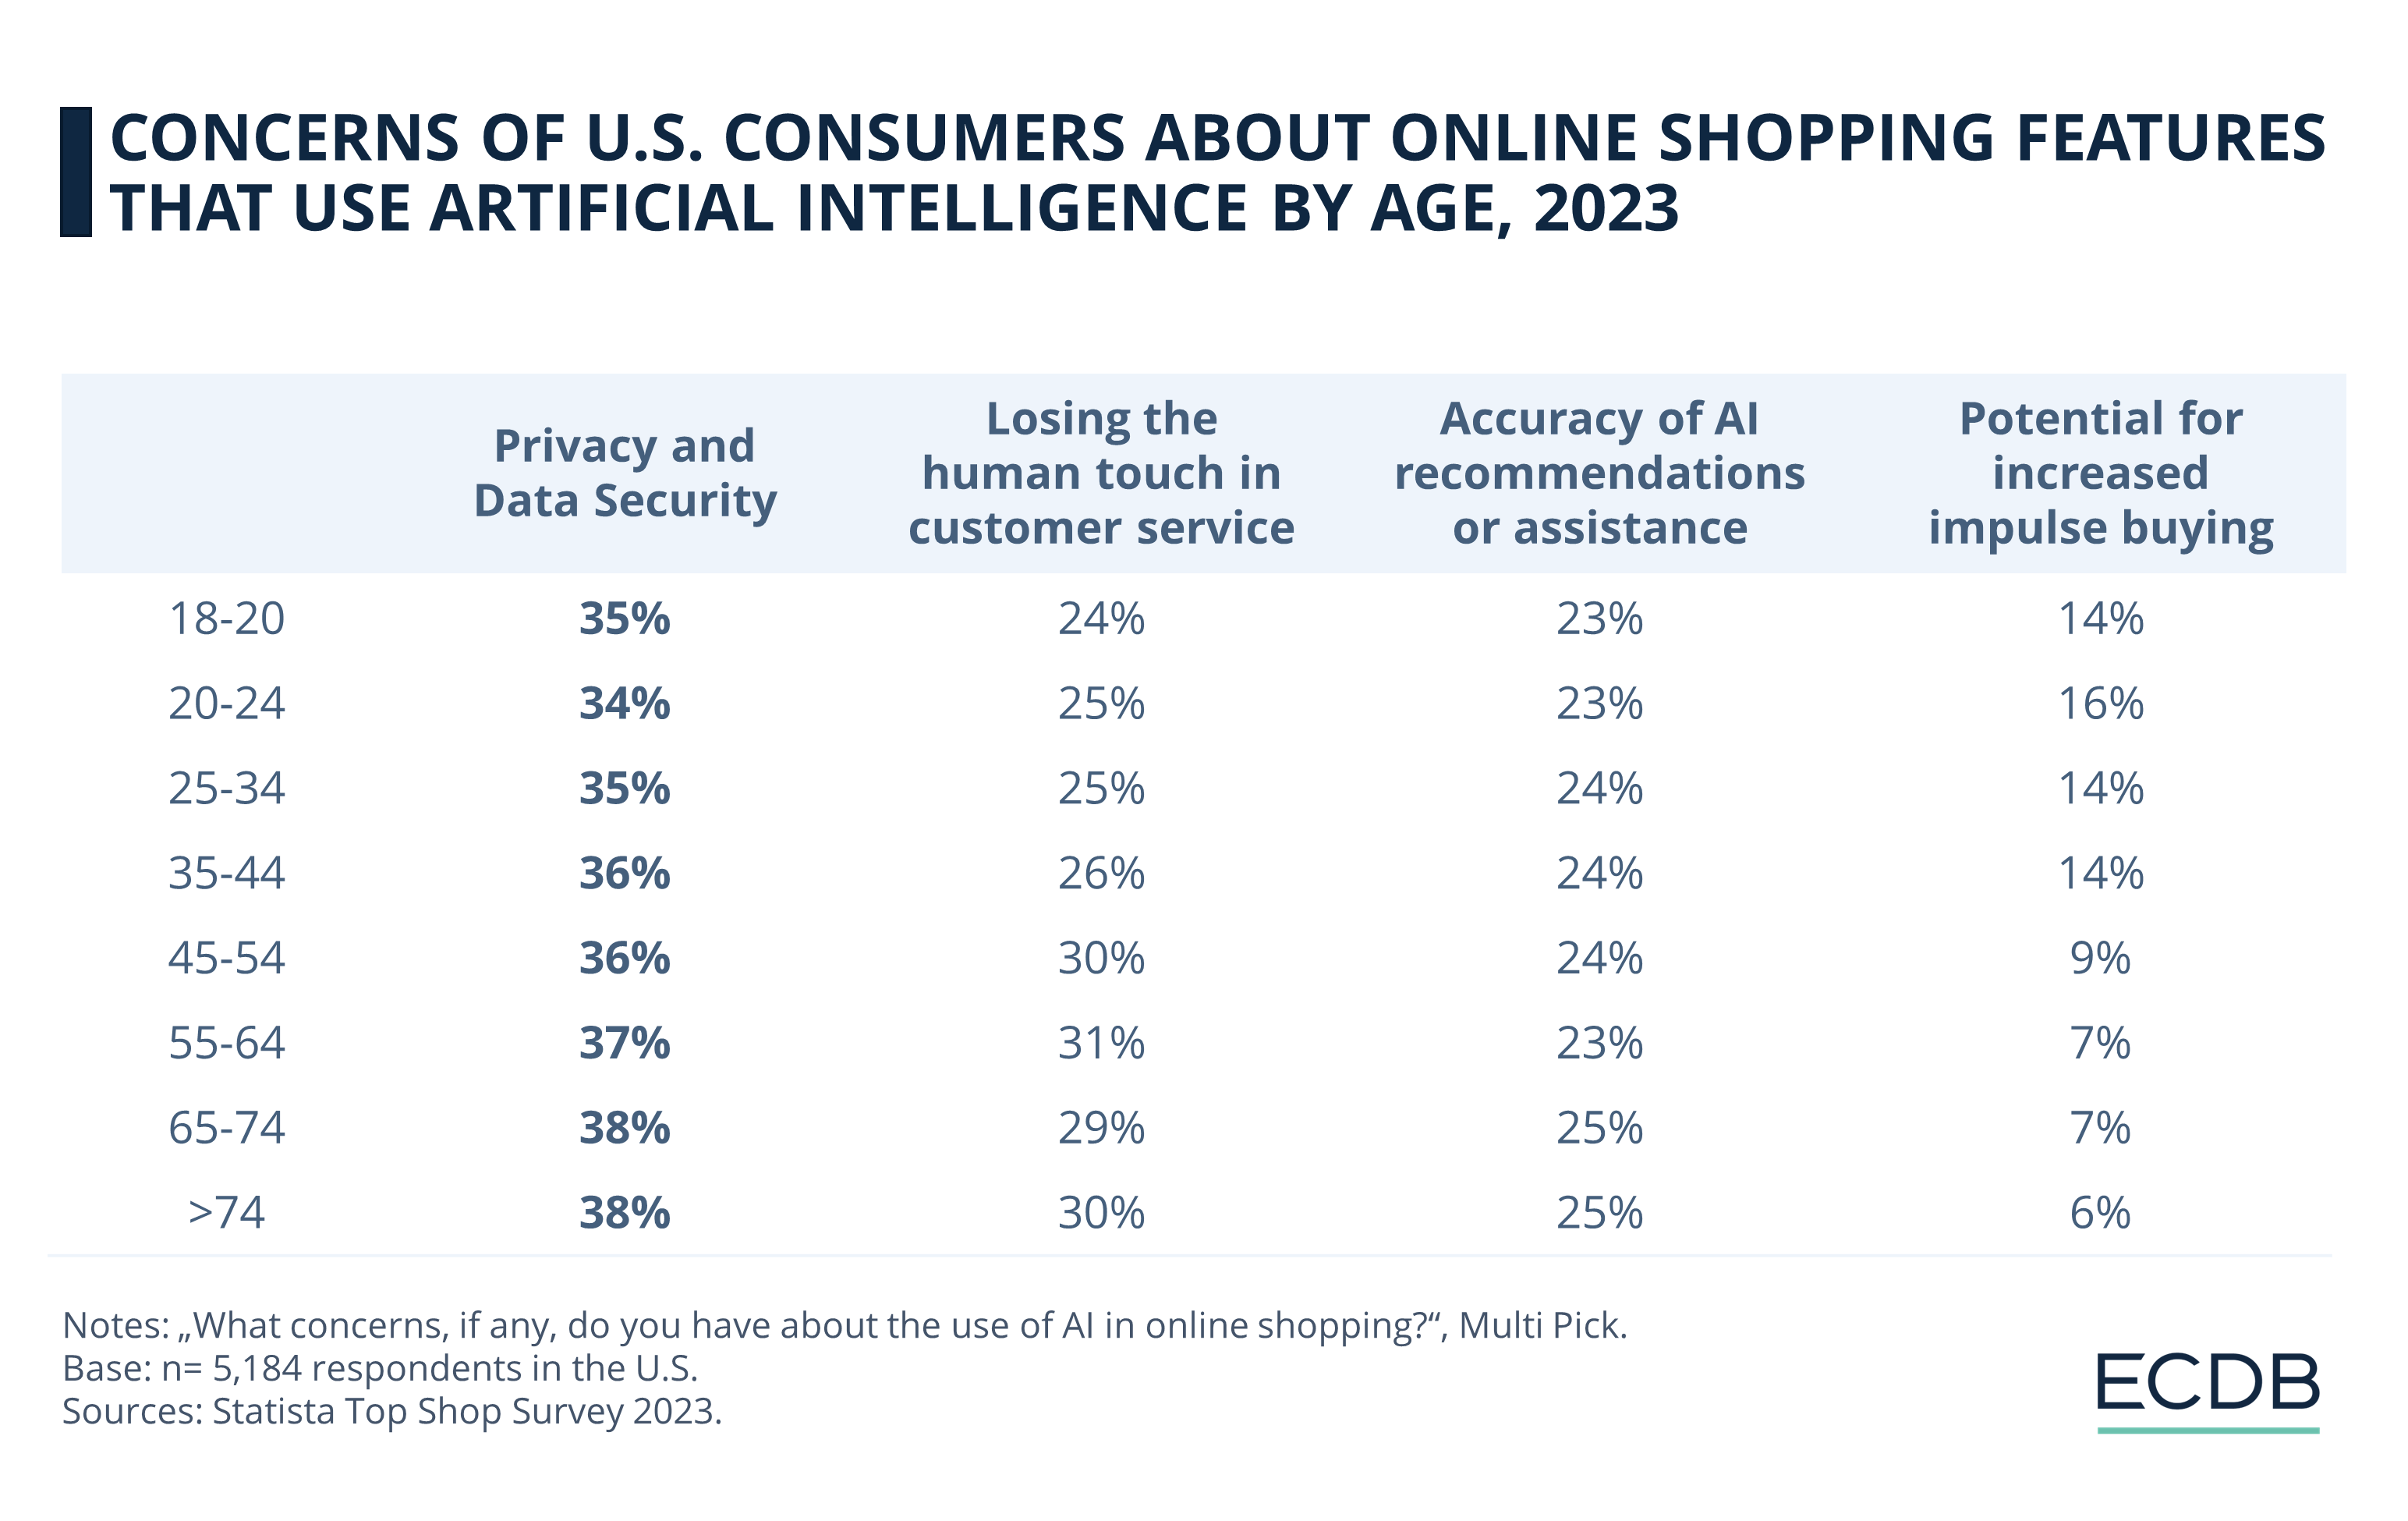 Concerns of U.S. Online Shoppers About Online Shopping Features That Use Artificial Intelligence by Age, 2023